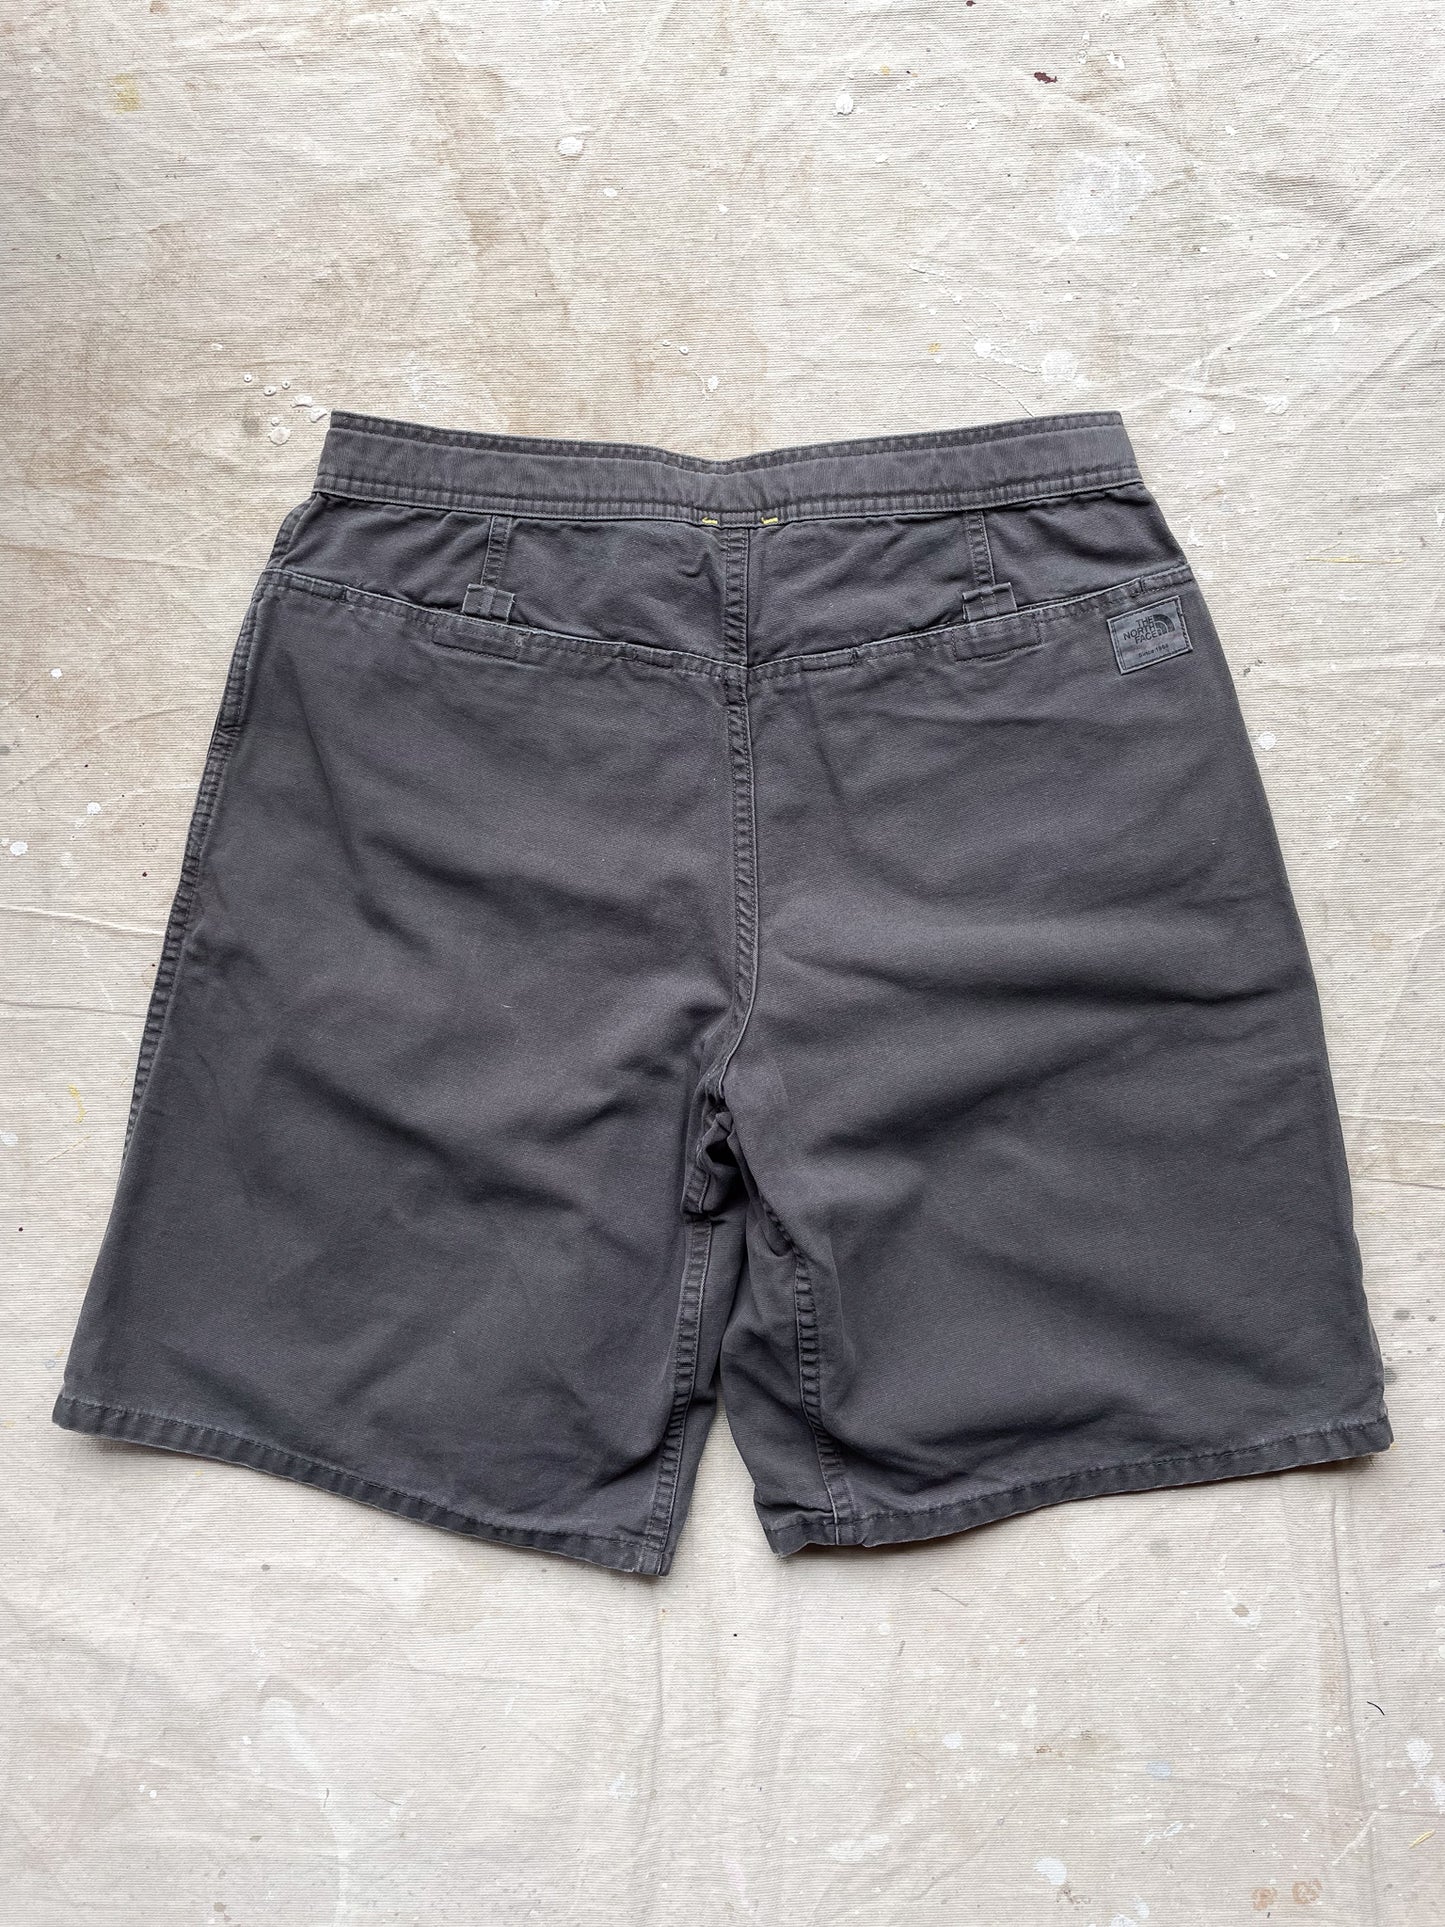 THE NORTH FACE A5 SERIES SHORTS—[34]